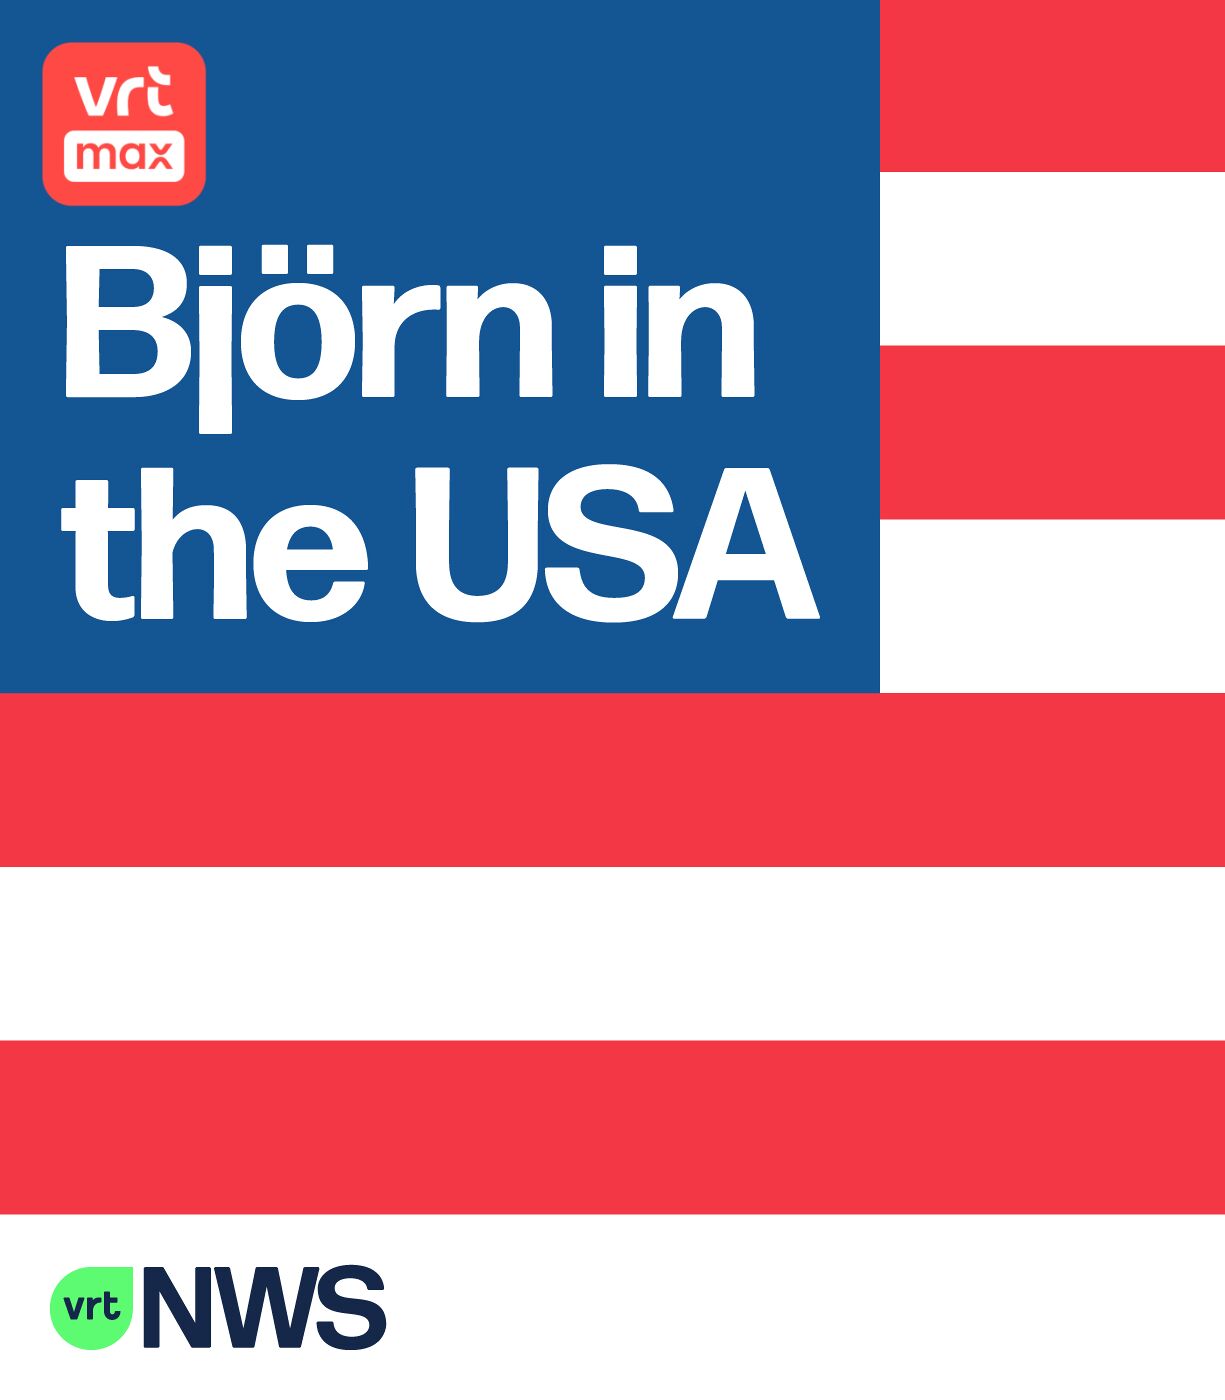 Björn in the USA logo